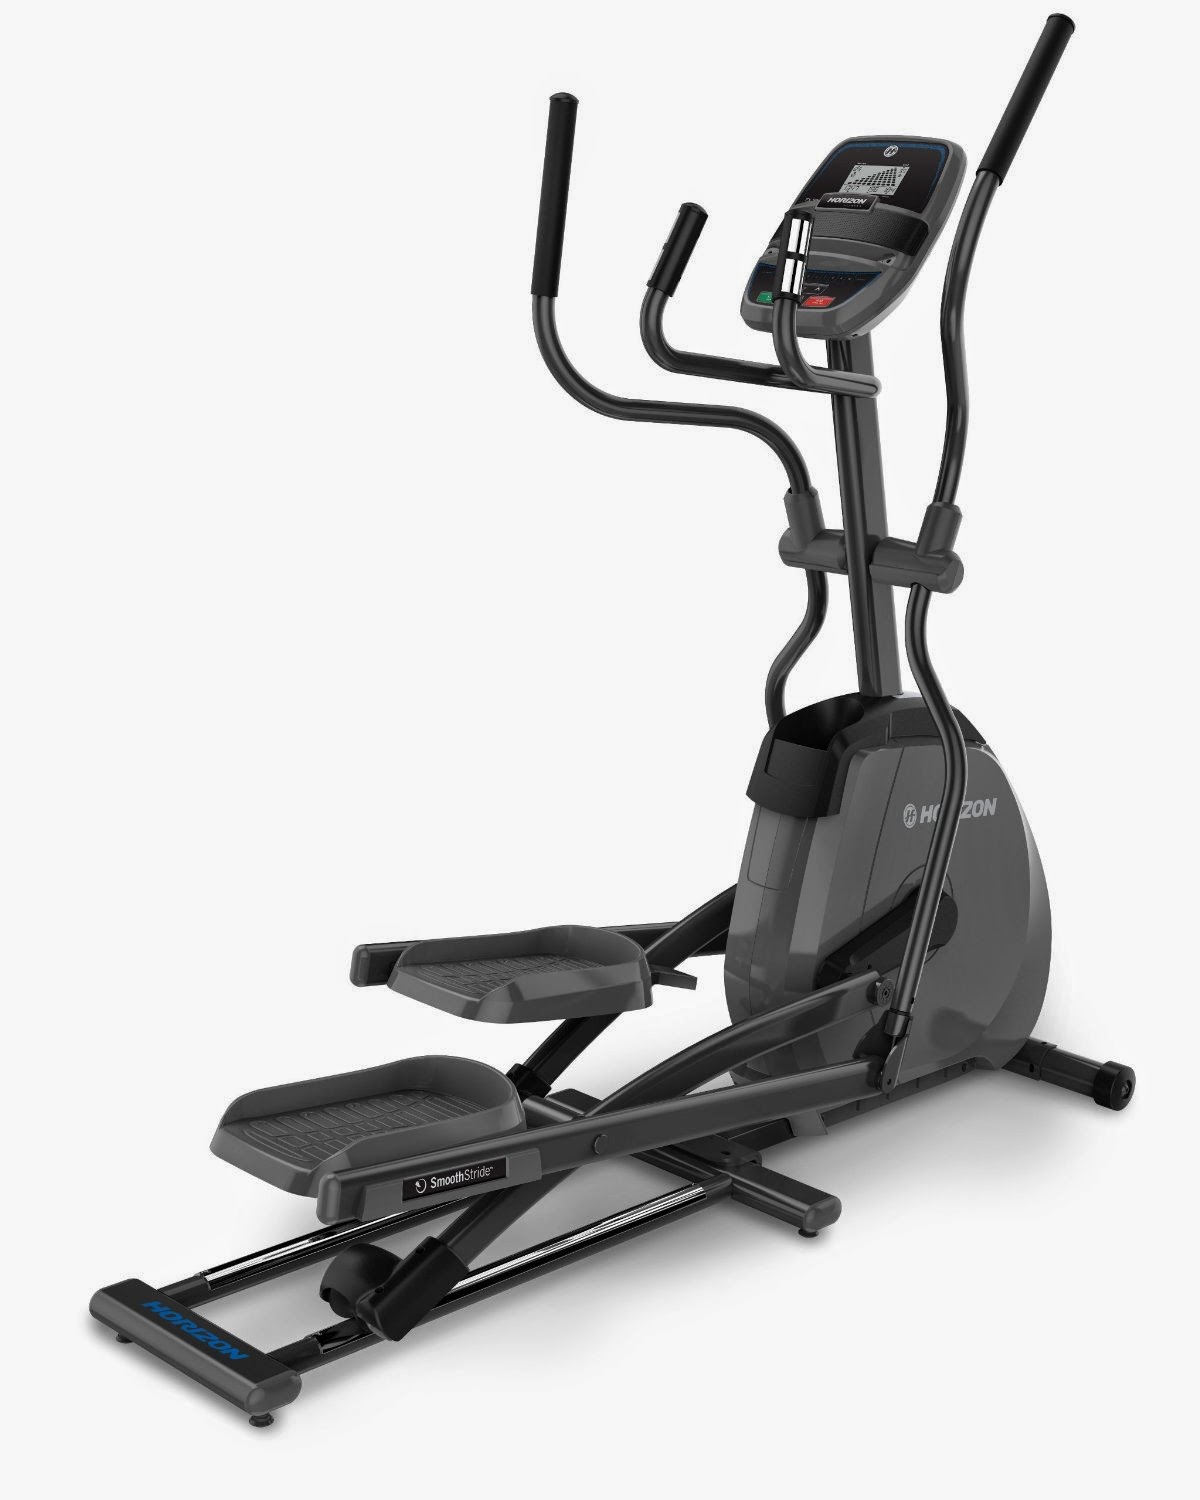 Horizon Fitness EX 59 2 Elliptical Trainer, picture, review features & specifications plus compare with EX 69 2